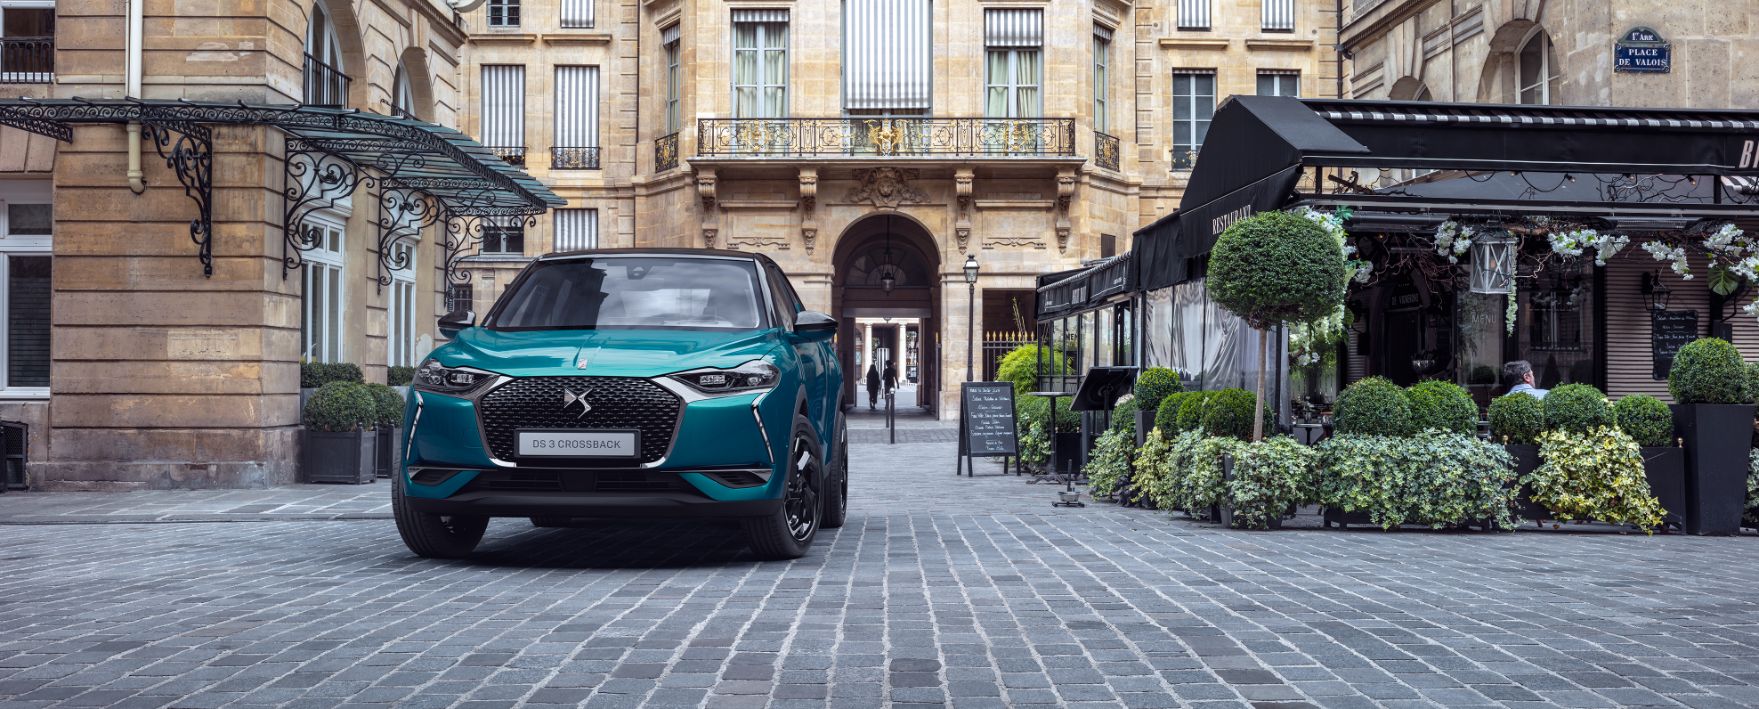 ds 3 crossback front view blue green.jpg